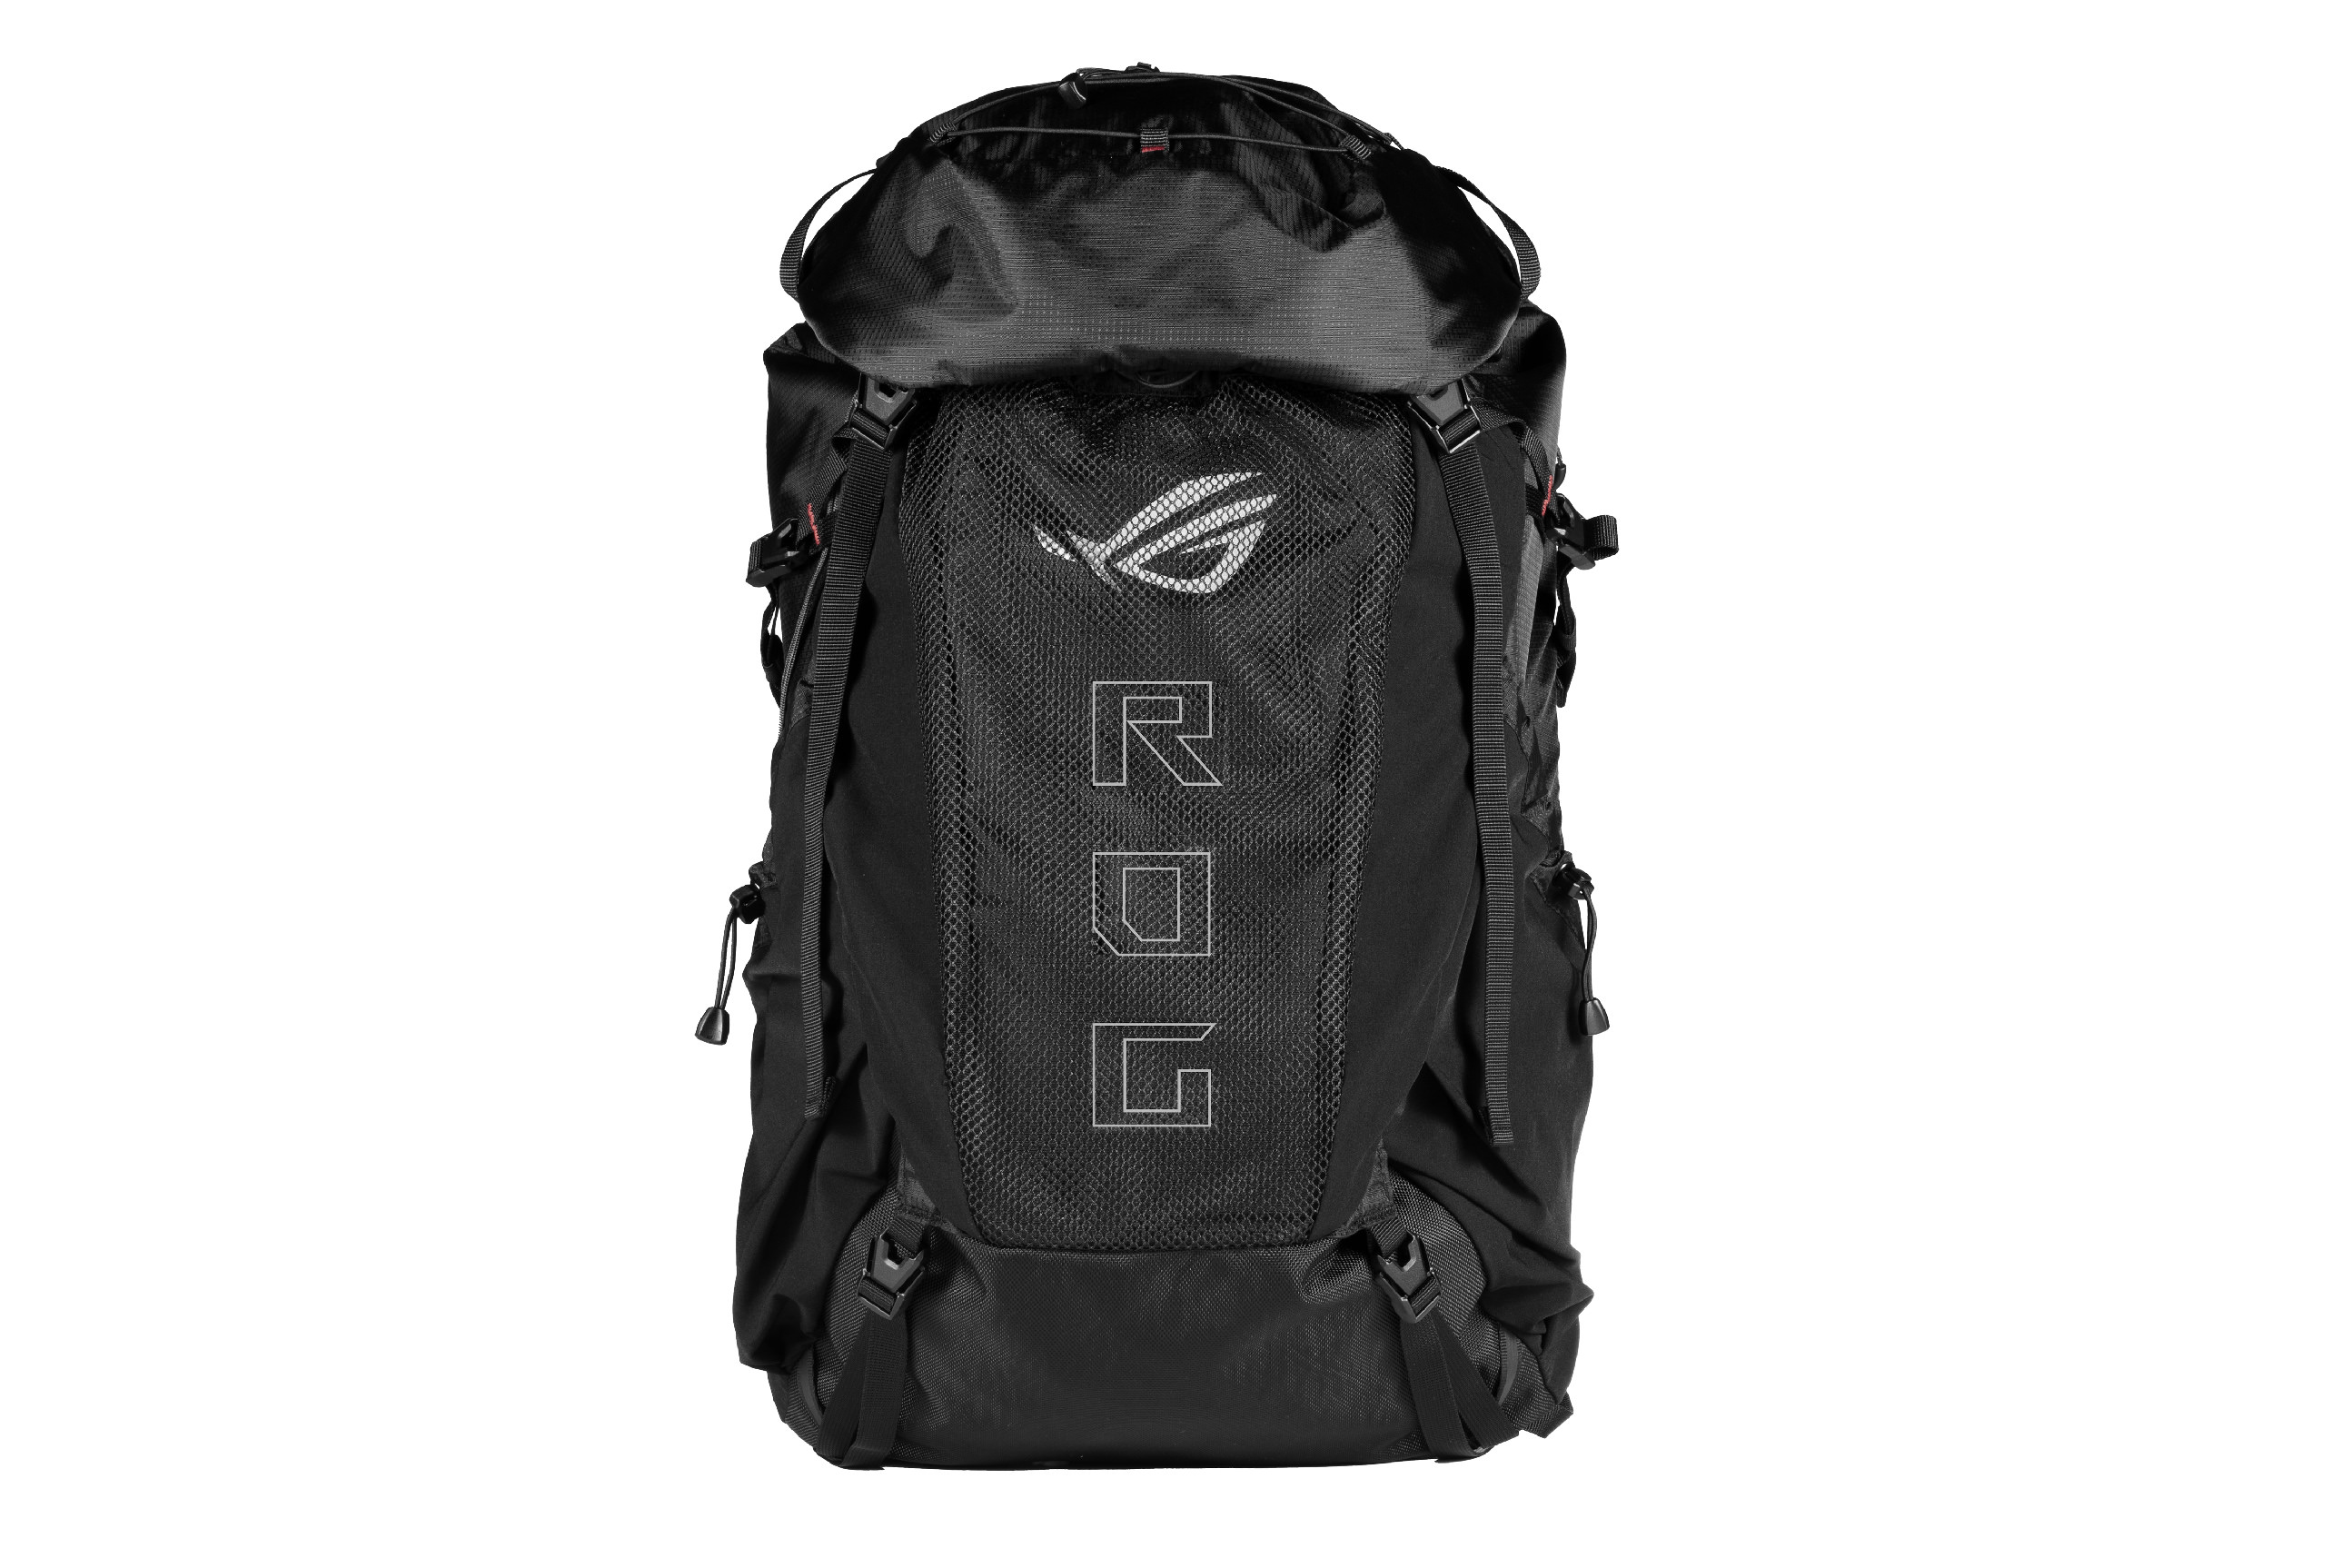 rog_archer_ergoair_gaming_backpack_product_photo_01